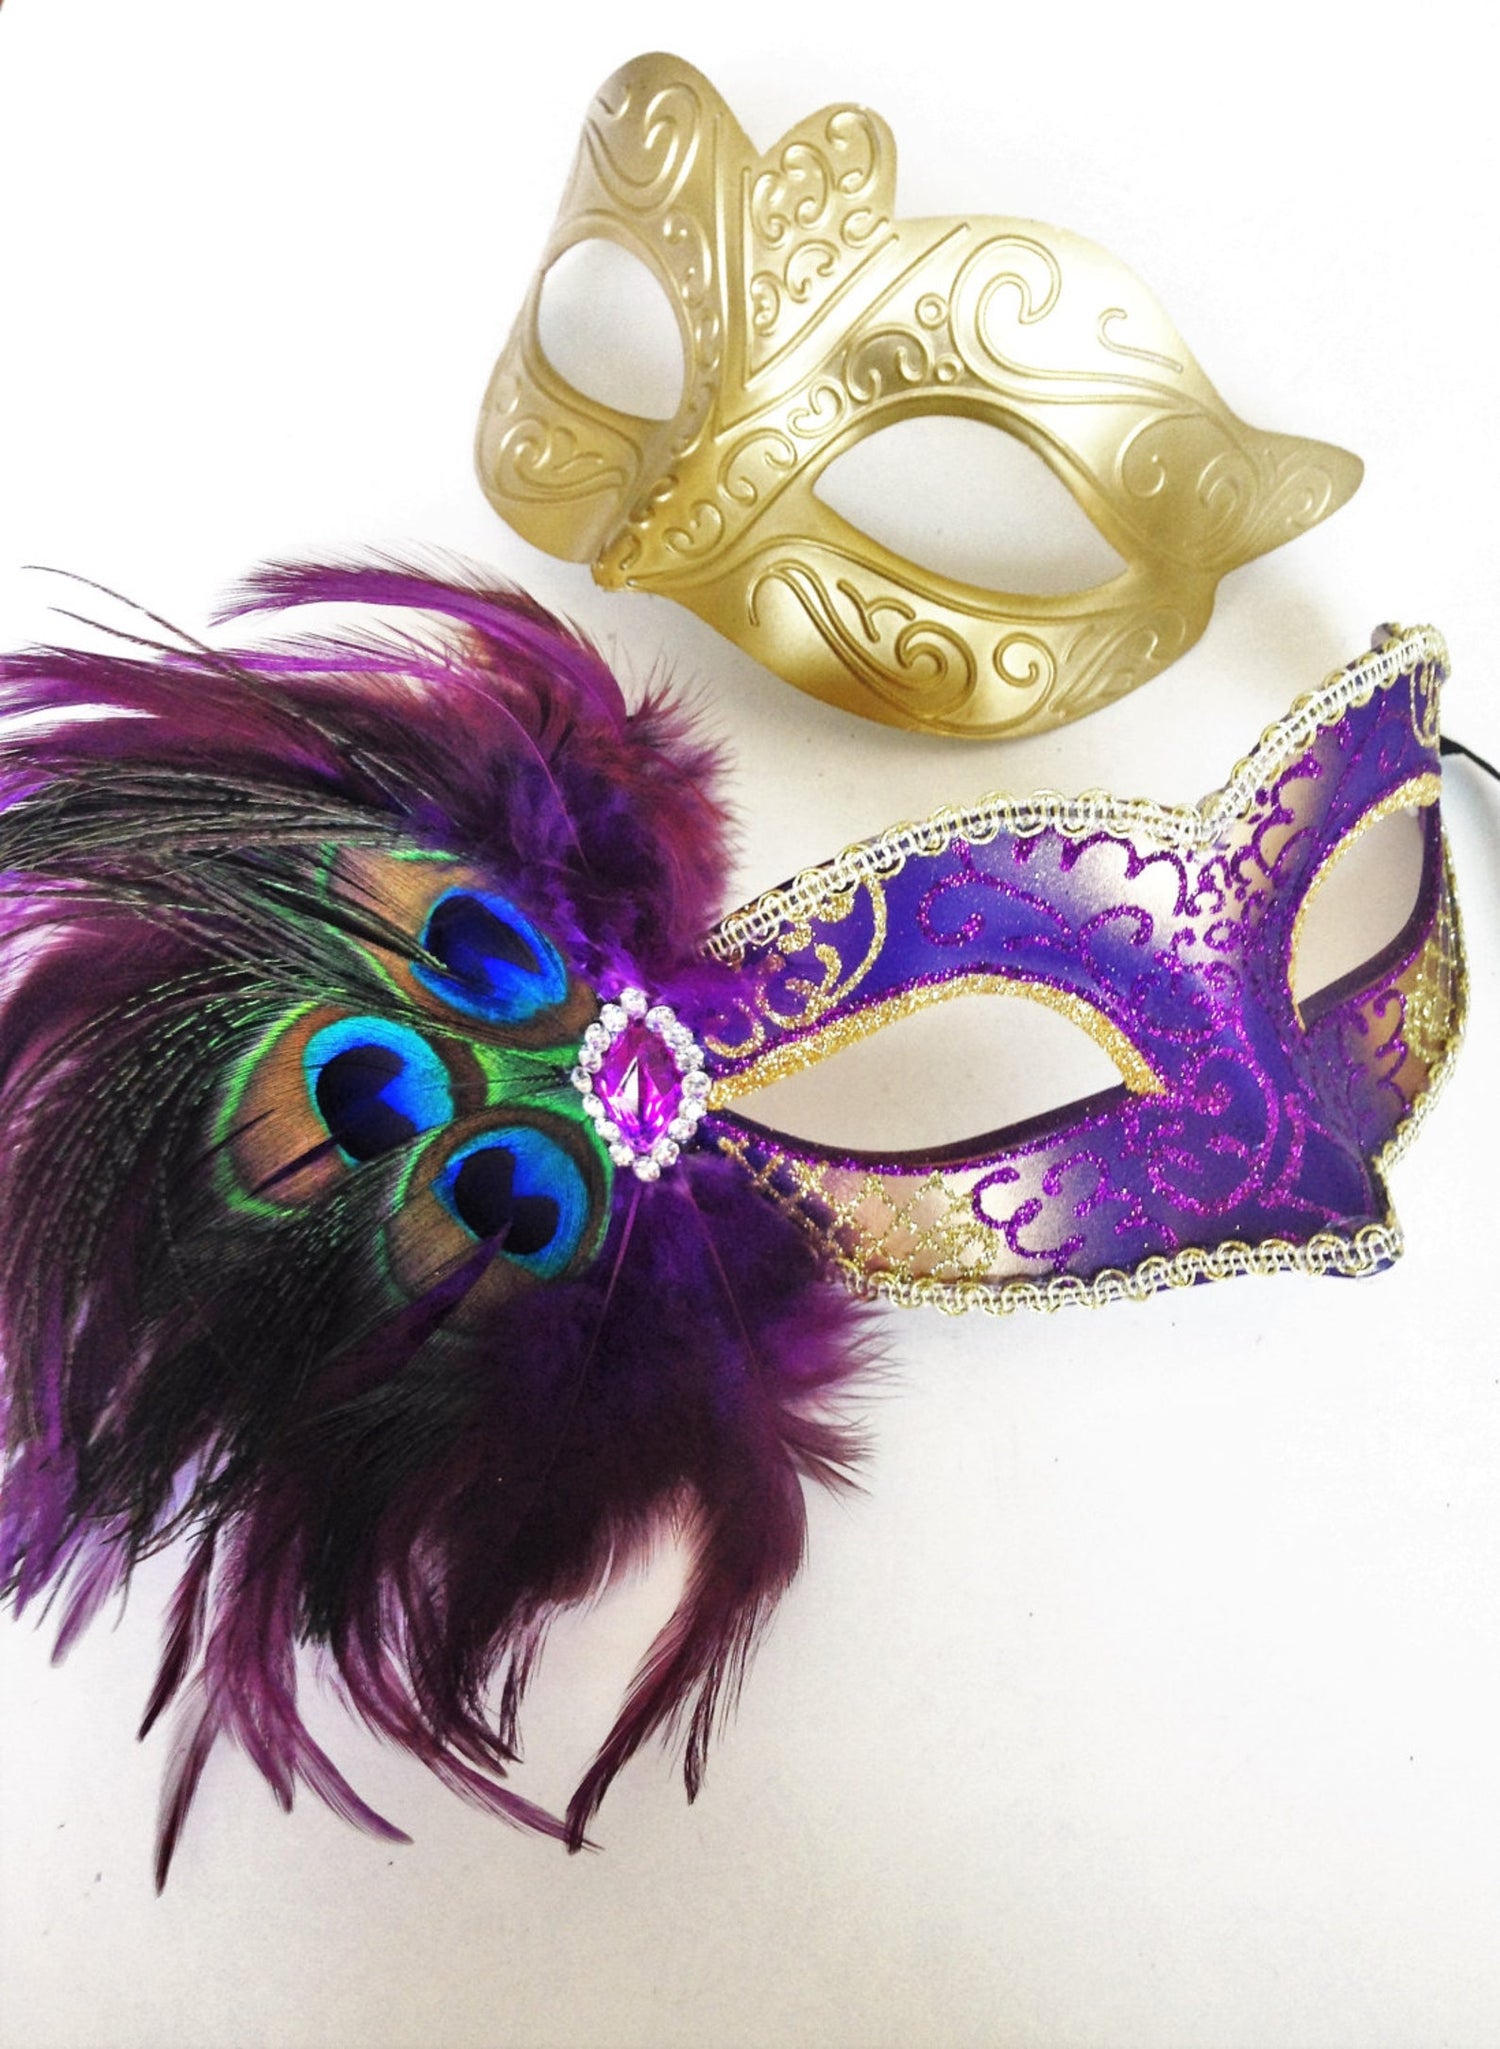 Couples Mardi Gras masquerade masks set in purple and gold for sale.